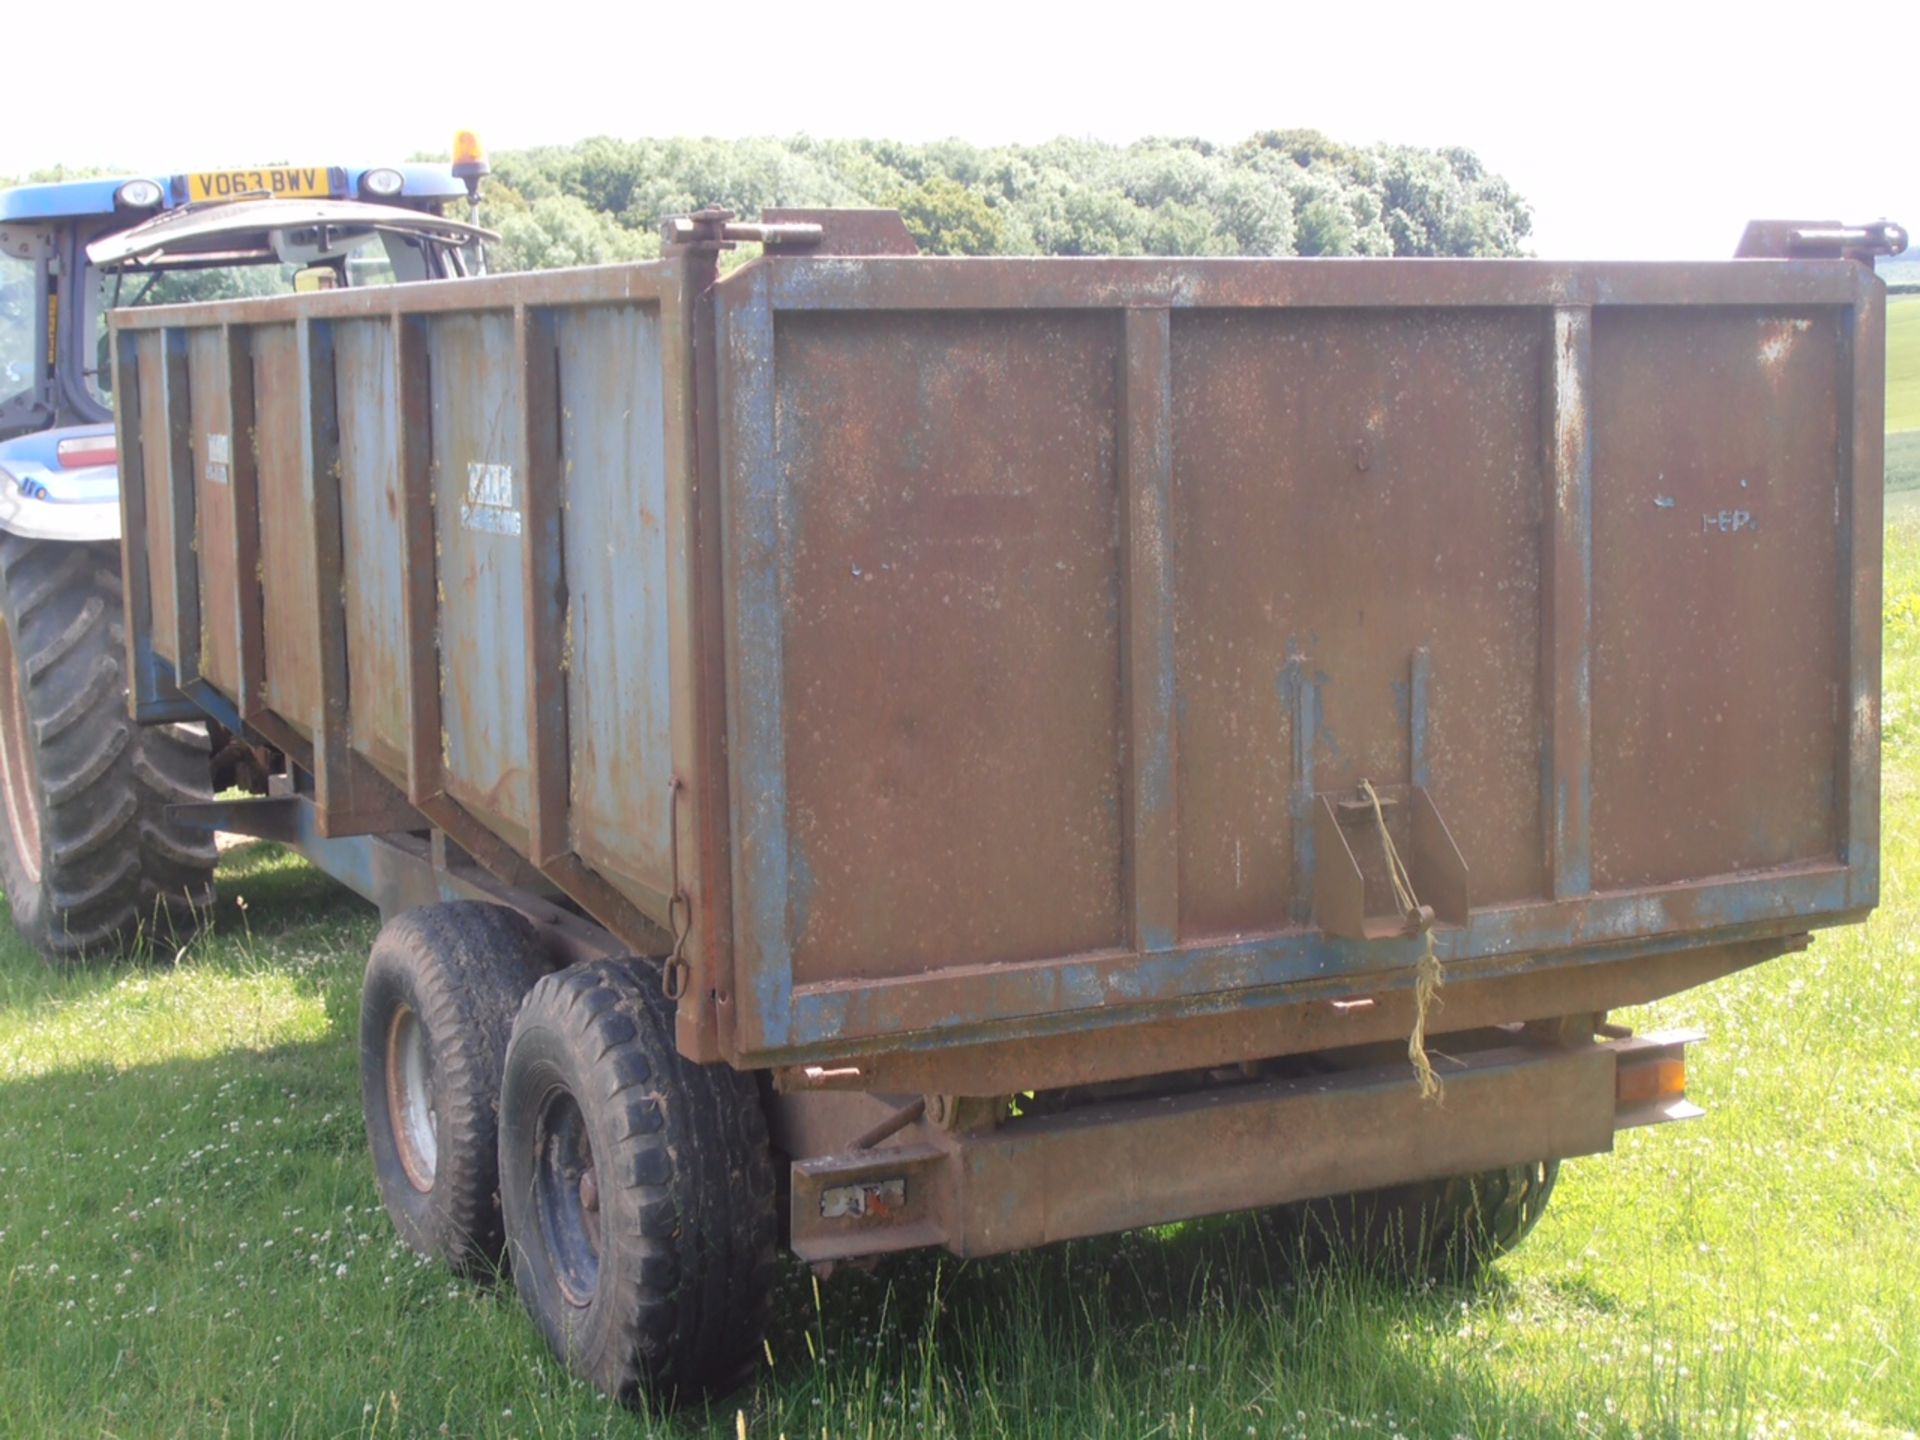 9 Tonne Tipping Trailer Location: Monmouth, Monmouthshire - Image 2 of 3